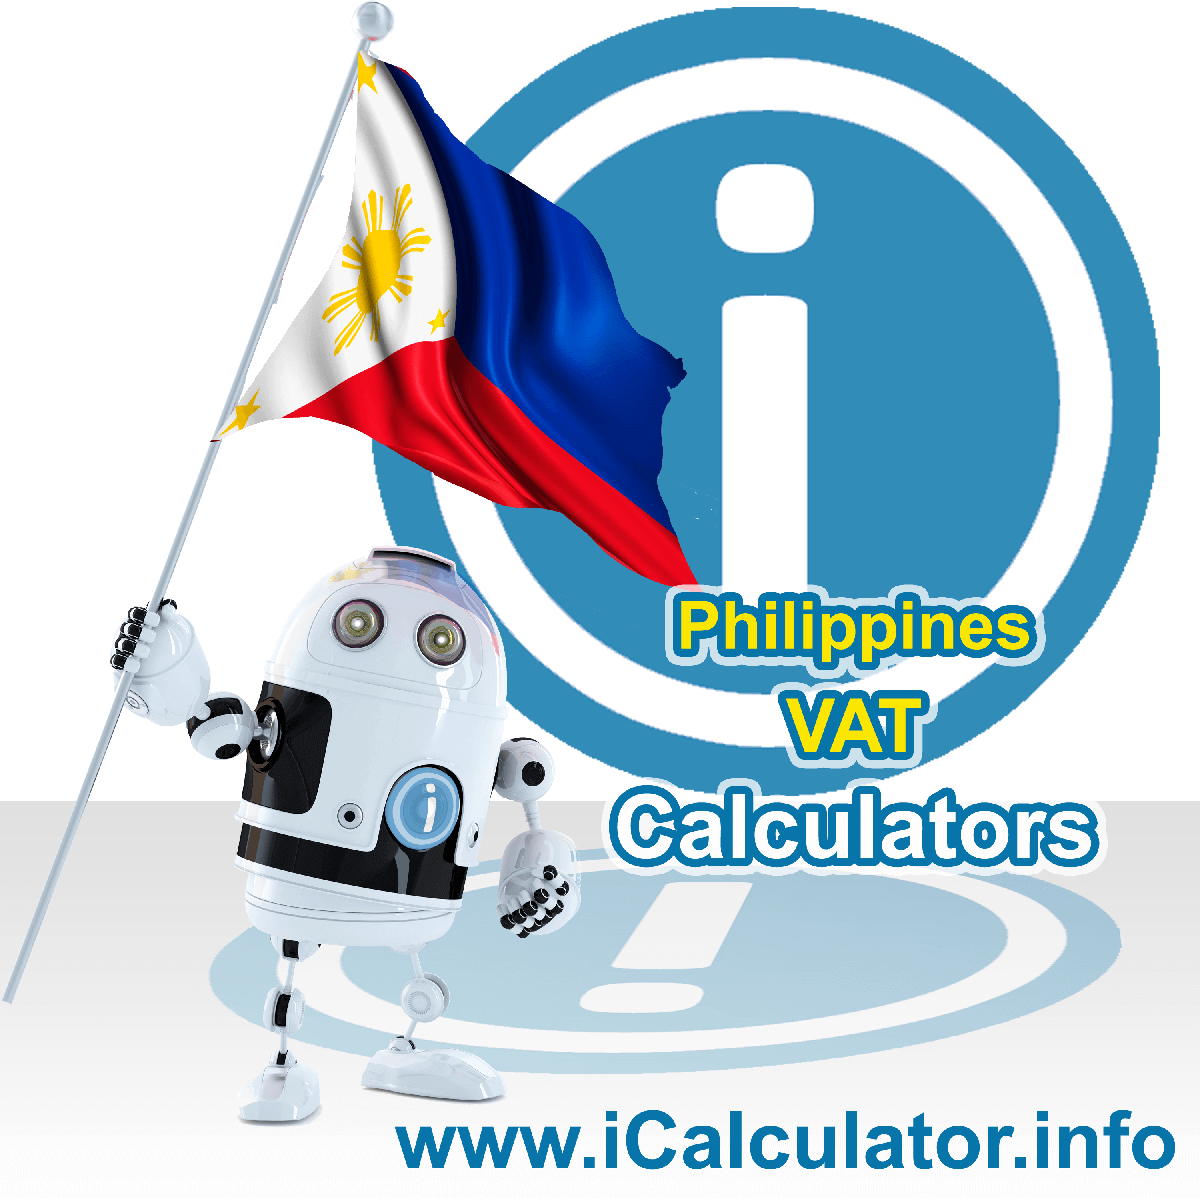 Philippines VAT Calculator. This image shows the Philippines flag and information relating to the VAT formula used for calculating Value Added Tax in Philippines using the Philippines VAT Calculator in 2023